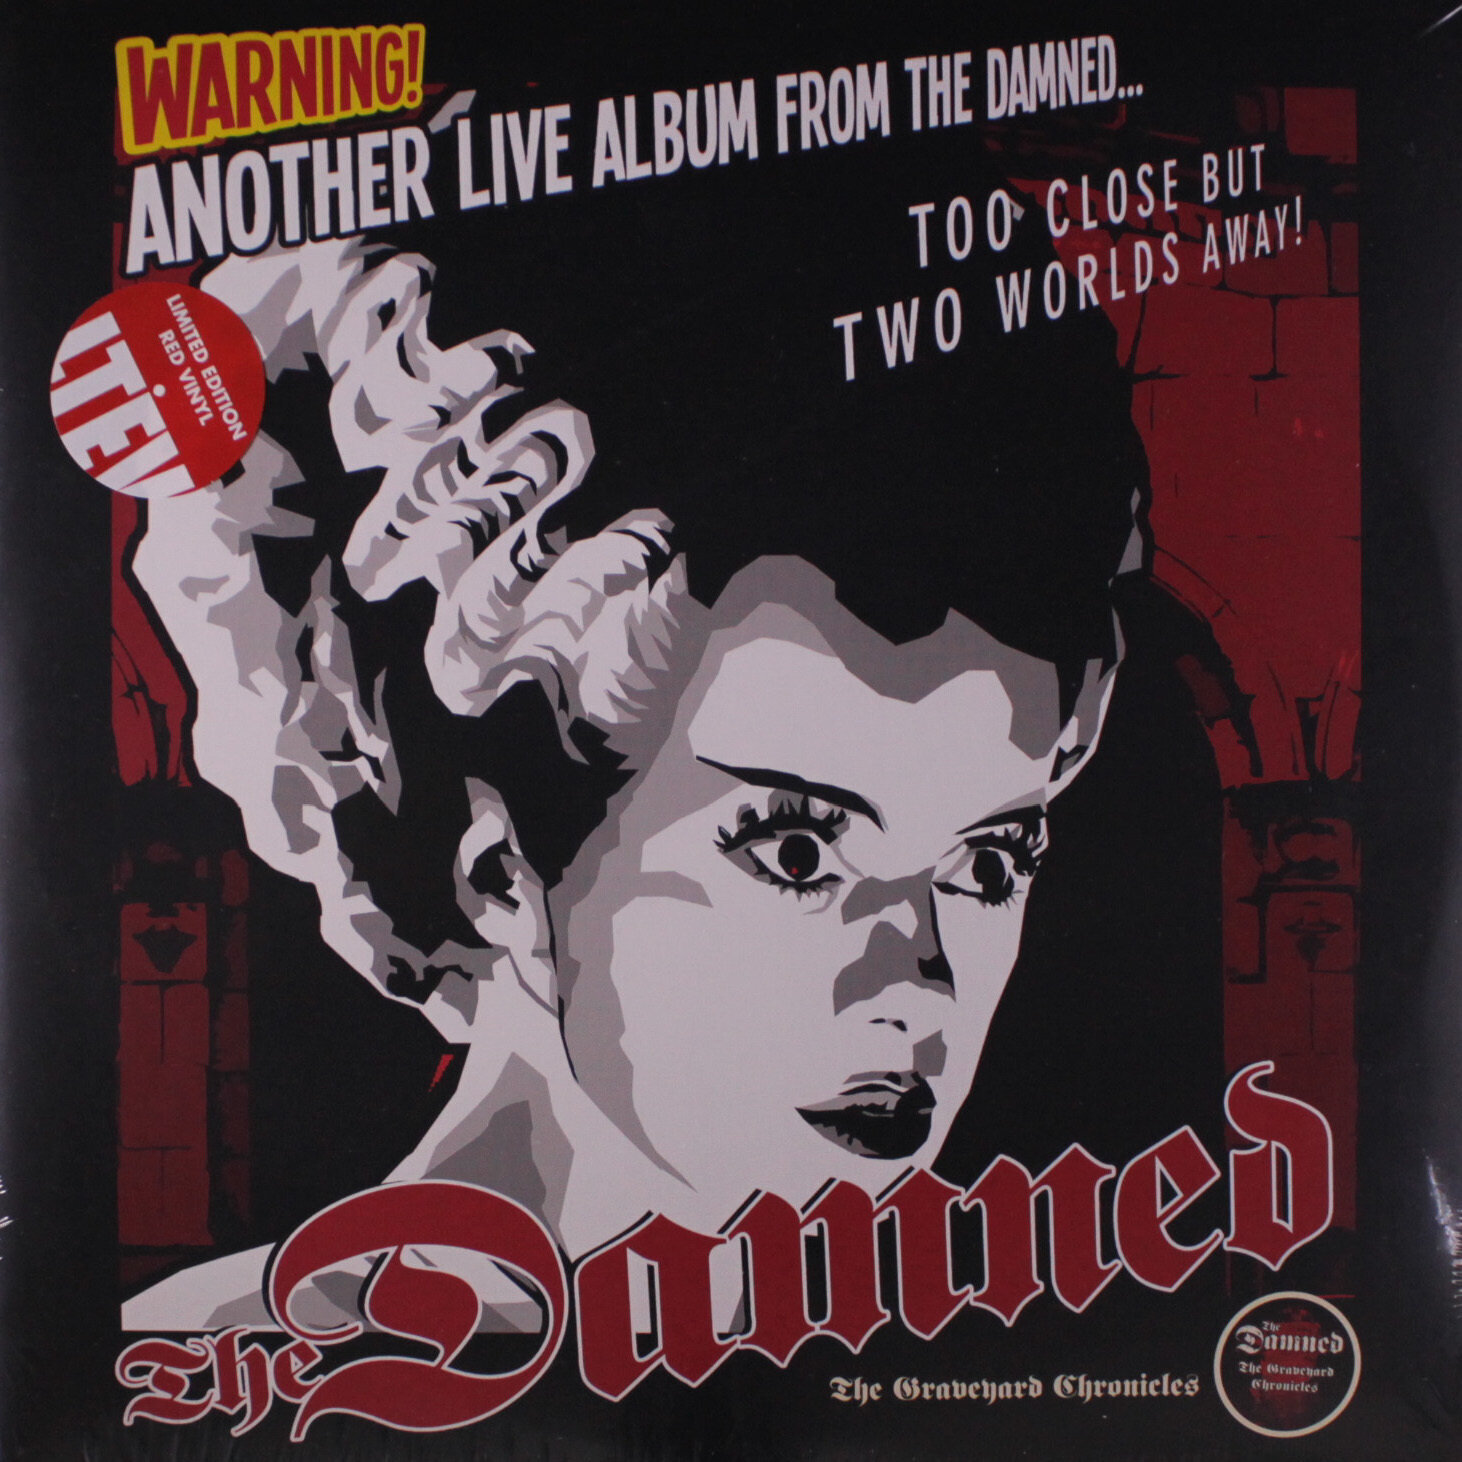 Vinyl Record The Damned - Another Live Album From ... (2 LP)